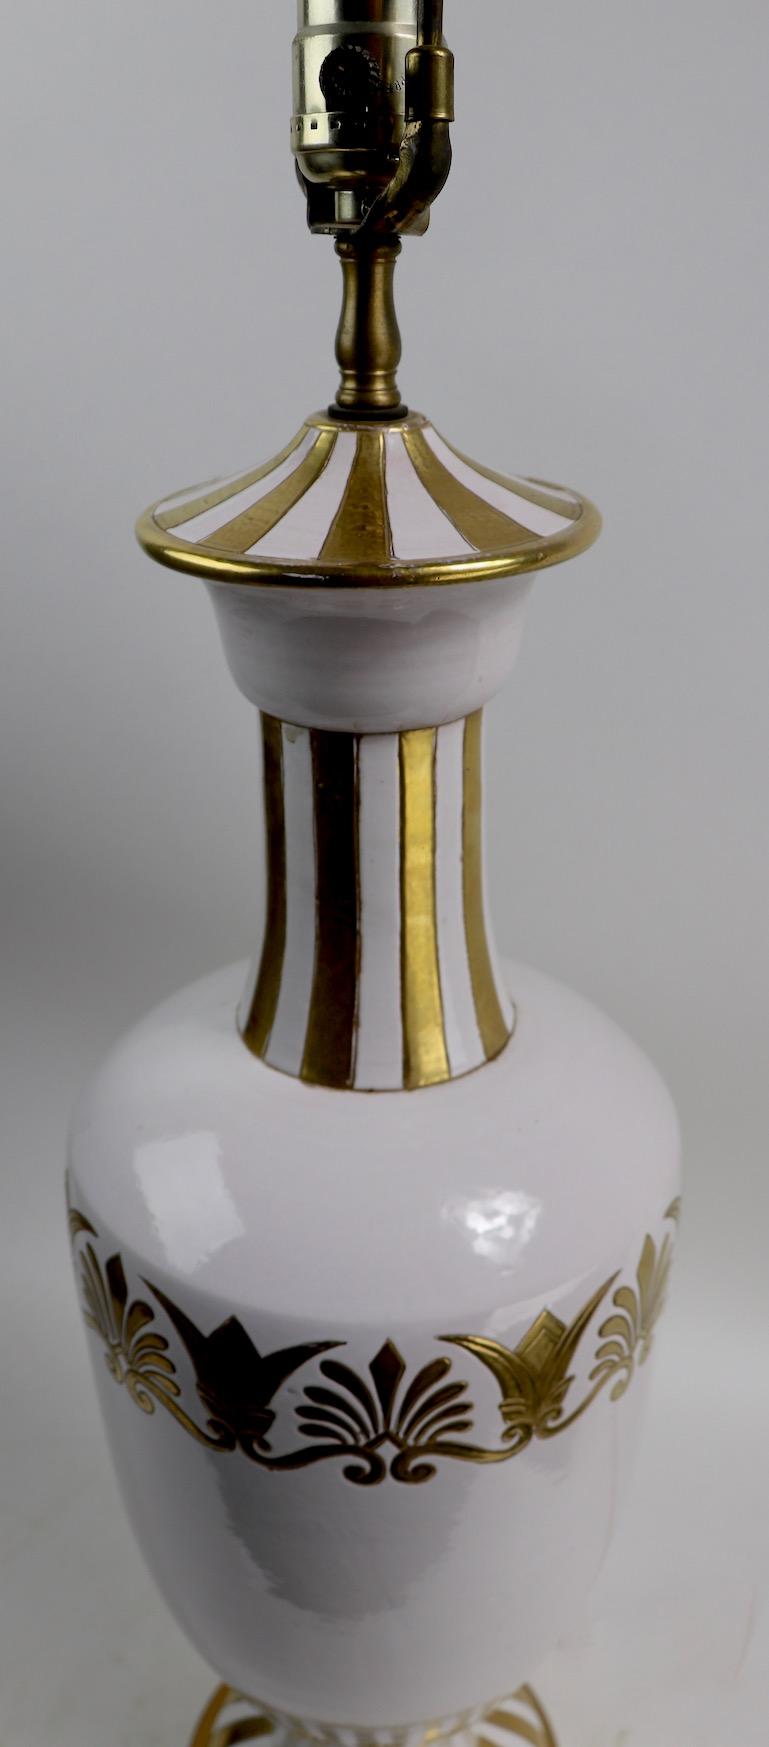 Ceramic White and Gold Gilt Table Lamp by Ugo Zaccagnini For Sale 4